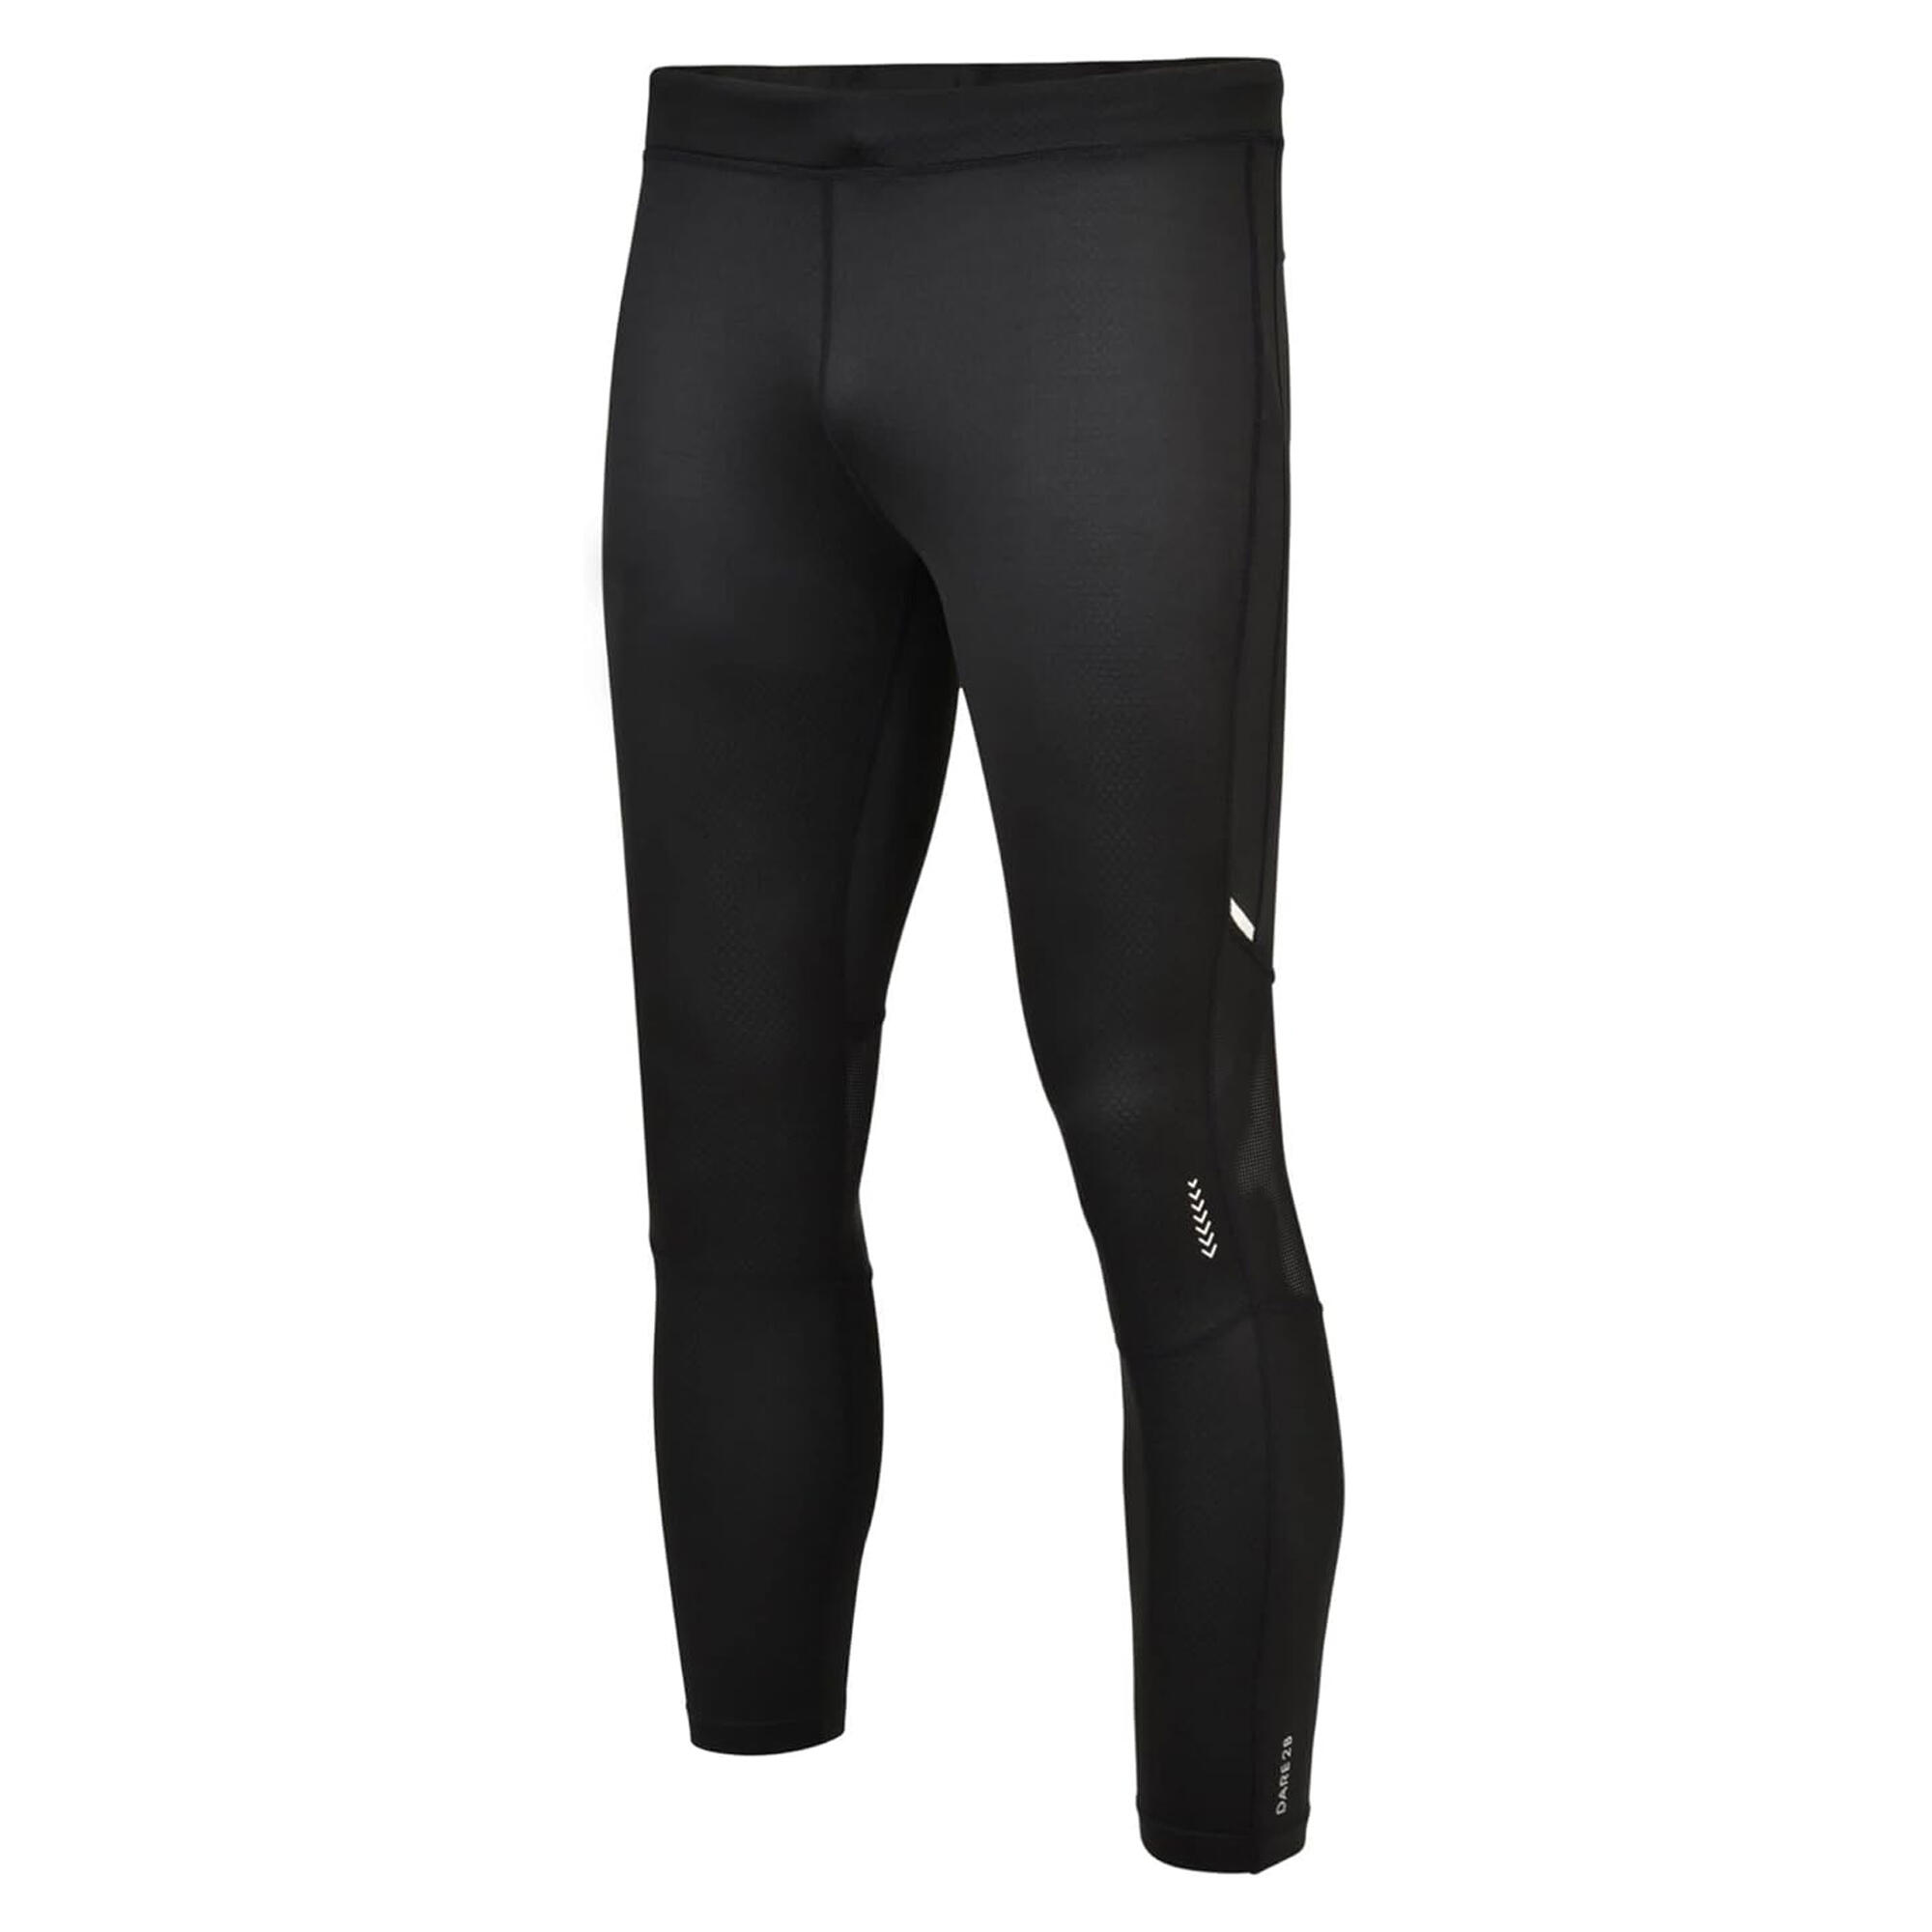 Mens Abaccus II Fitness Tights (Black) 3/4